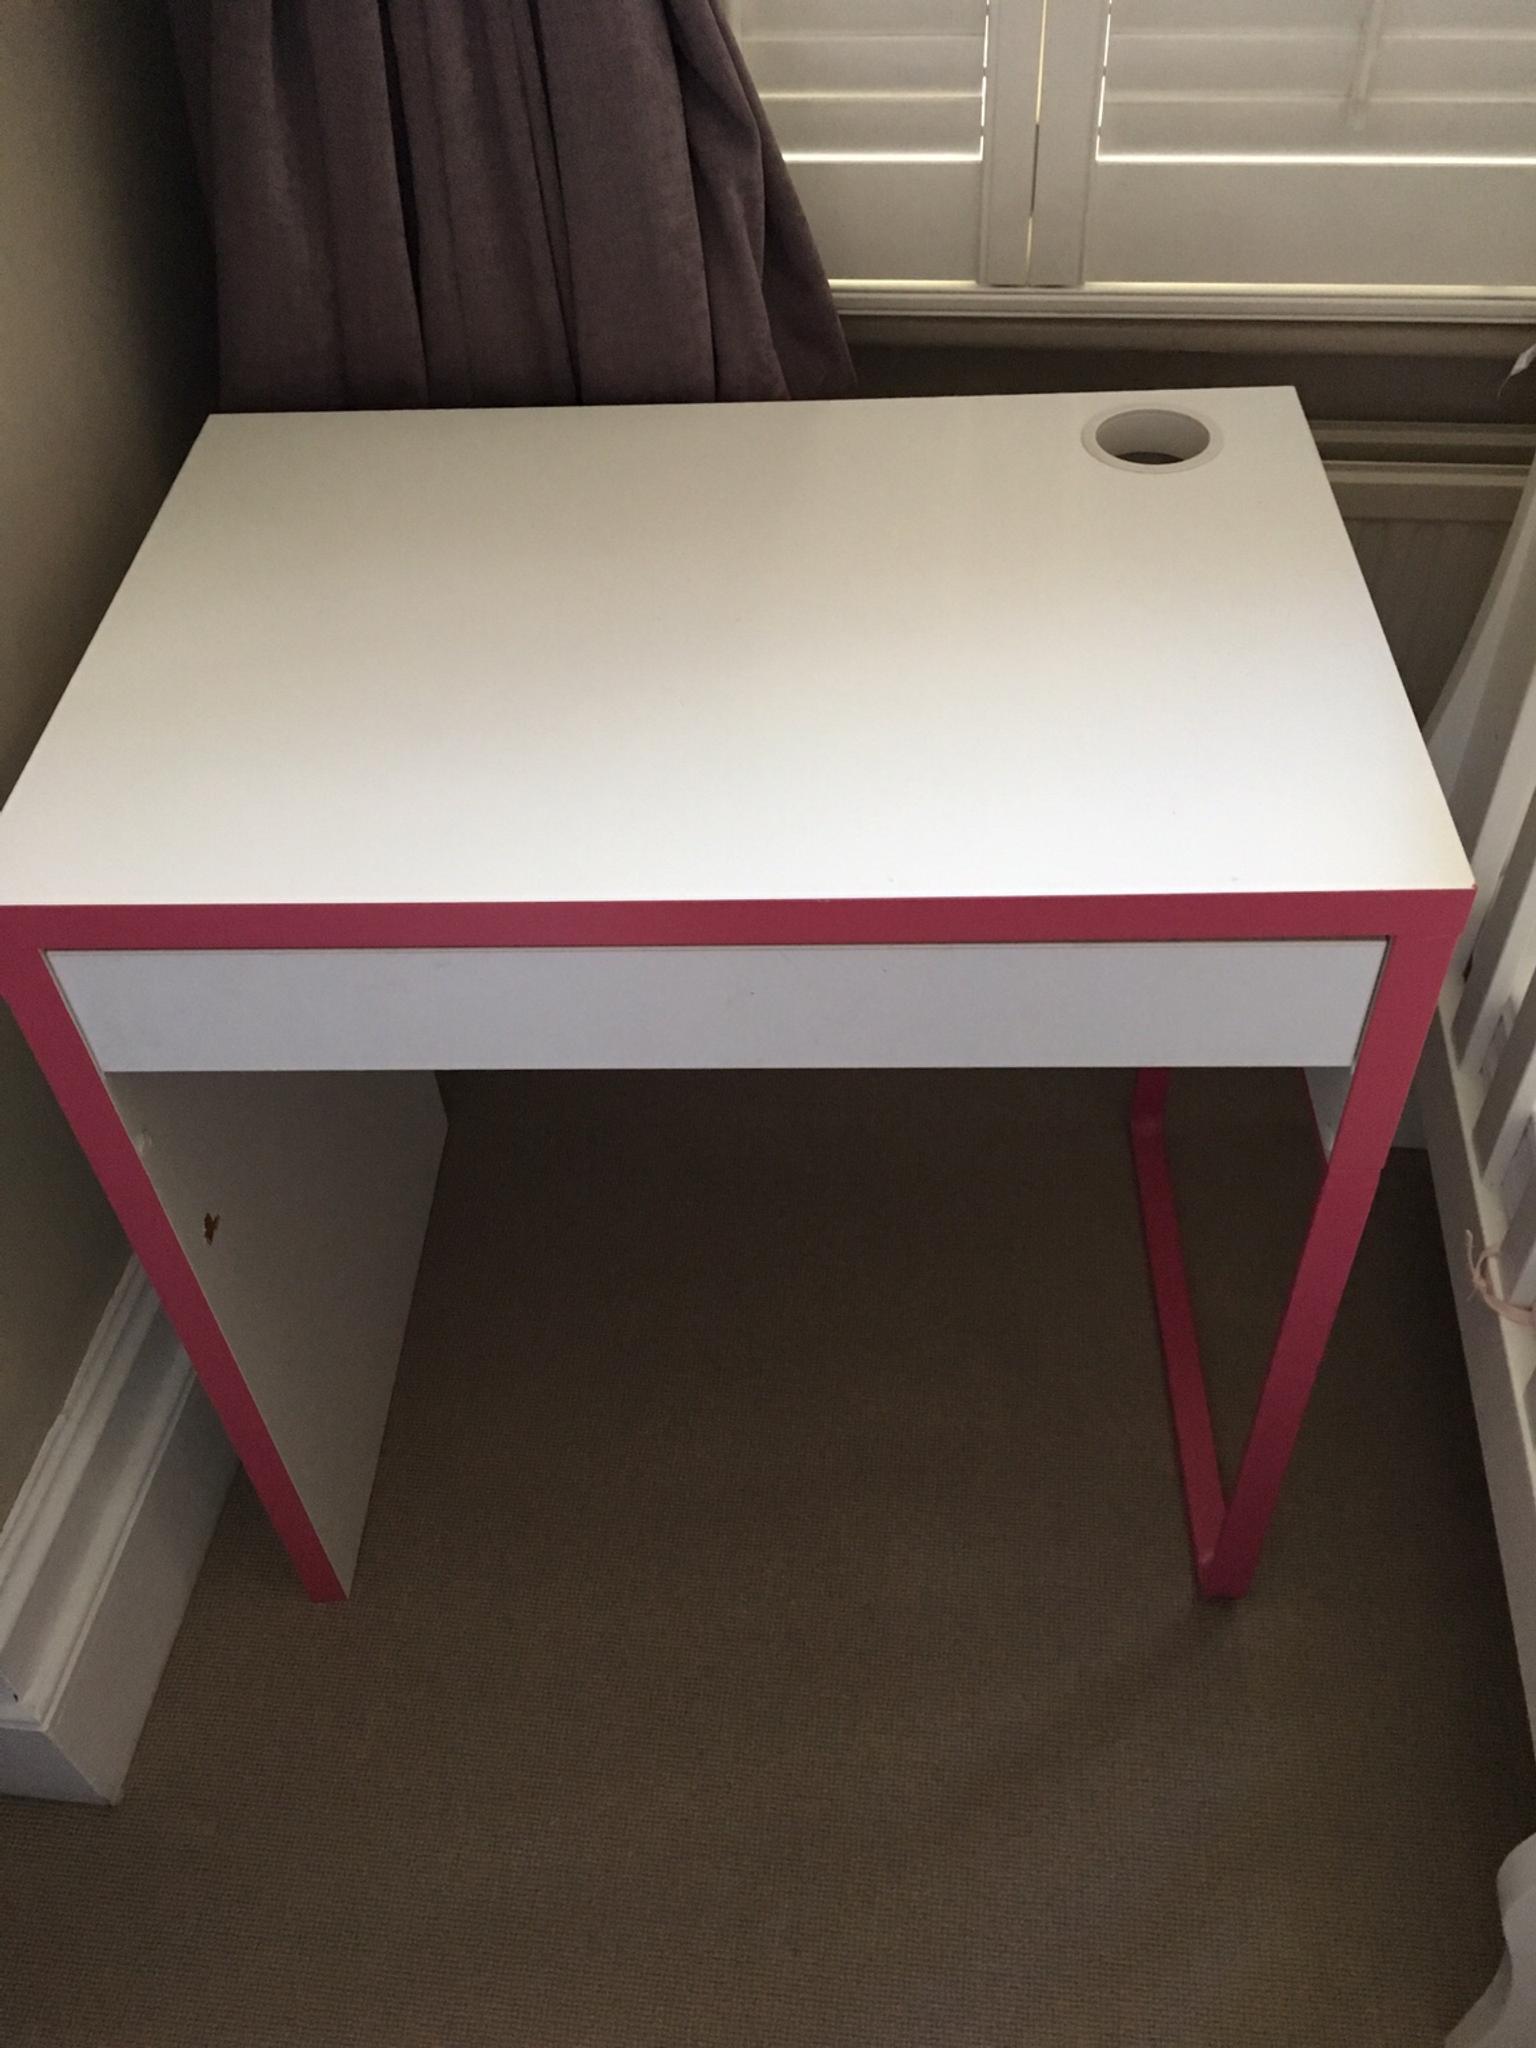 Ikea Micke Desk With Drawer In Sw17 London For 5 00 For Sale